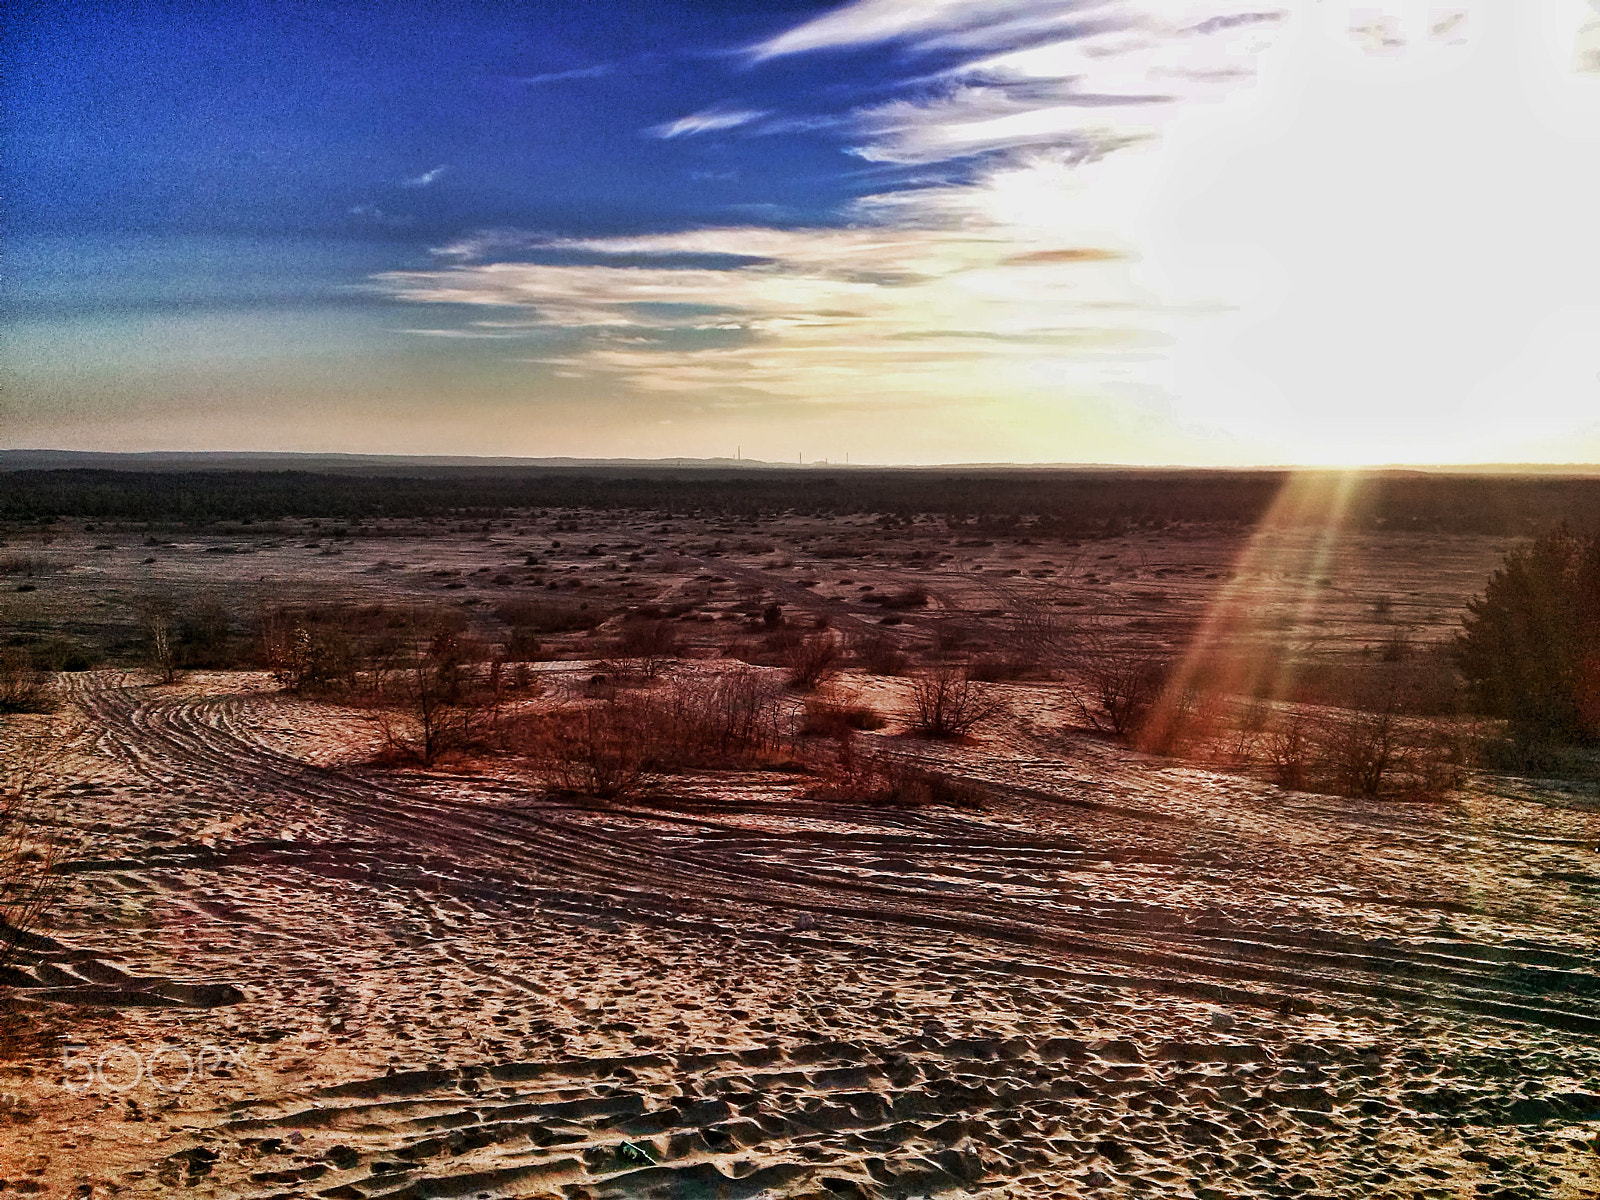 LG OPTIMUS L7 II sample photo. Desert in central europe? why not? photography